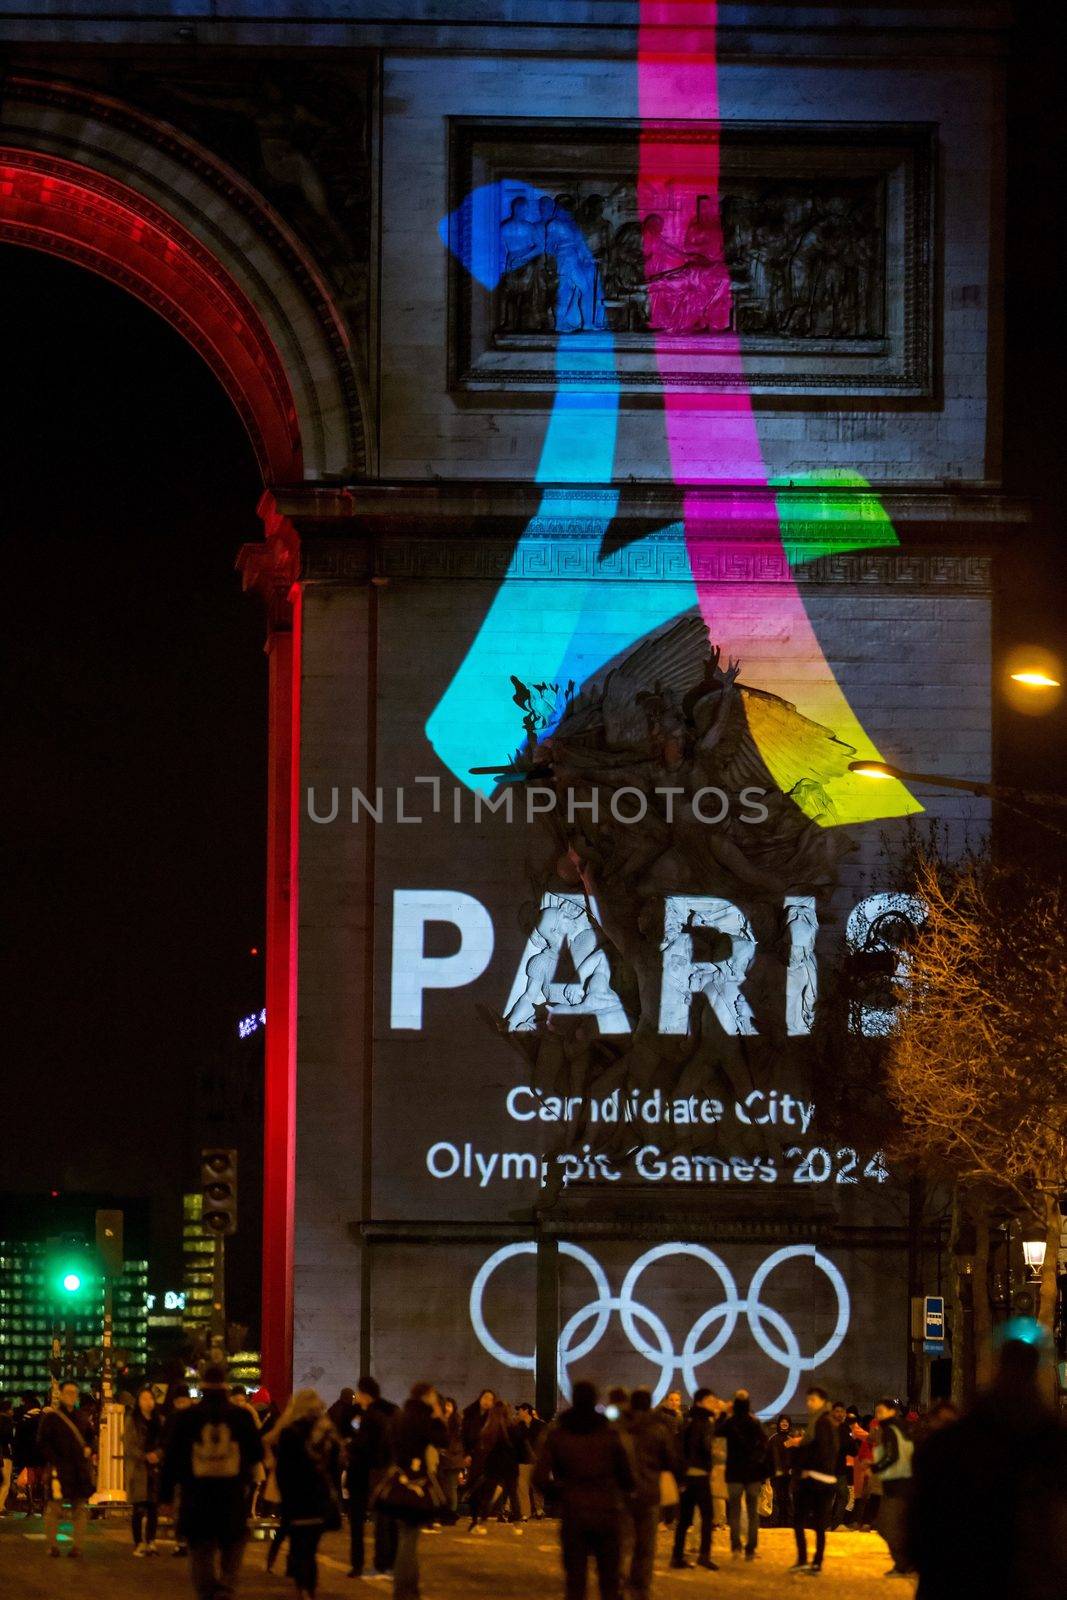 FRANCE, Paris: The logo for Paris as a candidate for the 2024 Olympics Games is projected onto the Arc de Triomphe in Paris on February 9, 2016.